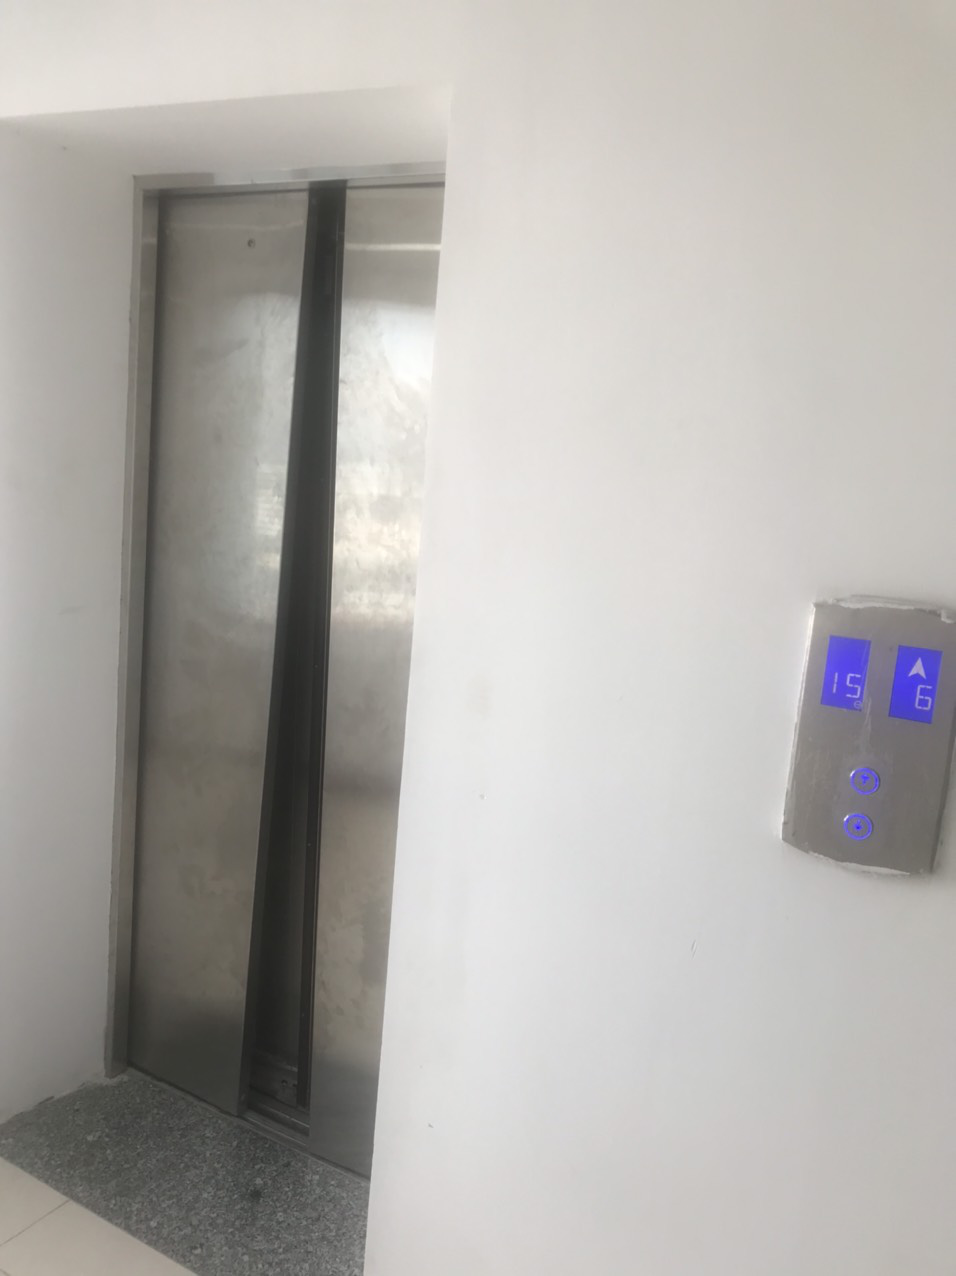 This supplied photo shows an elevator door failing to shut at the P.H Nha Trang apartment complex in Nha Trang City, Khanh Hoa Province, Vietnam.